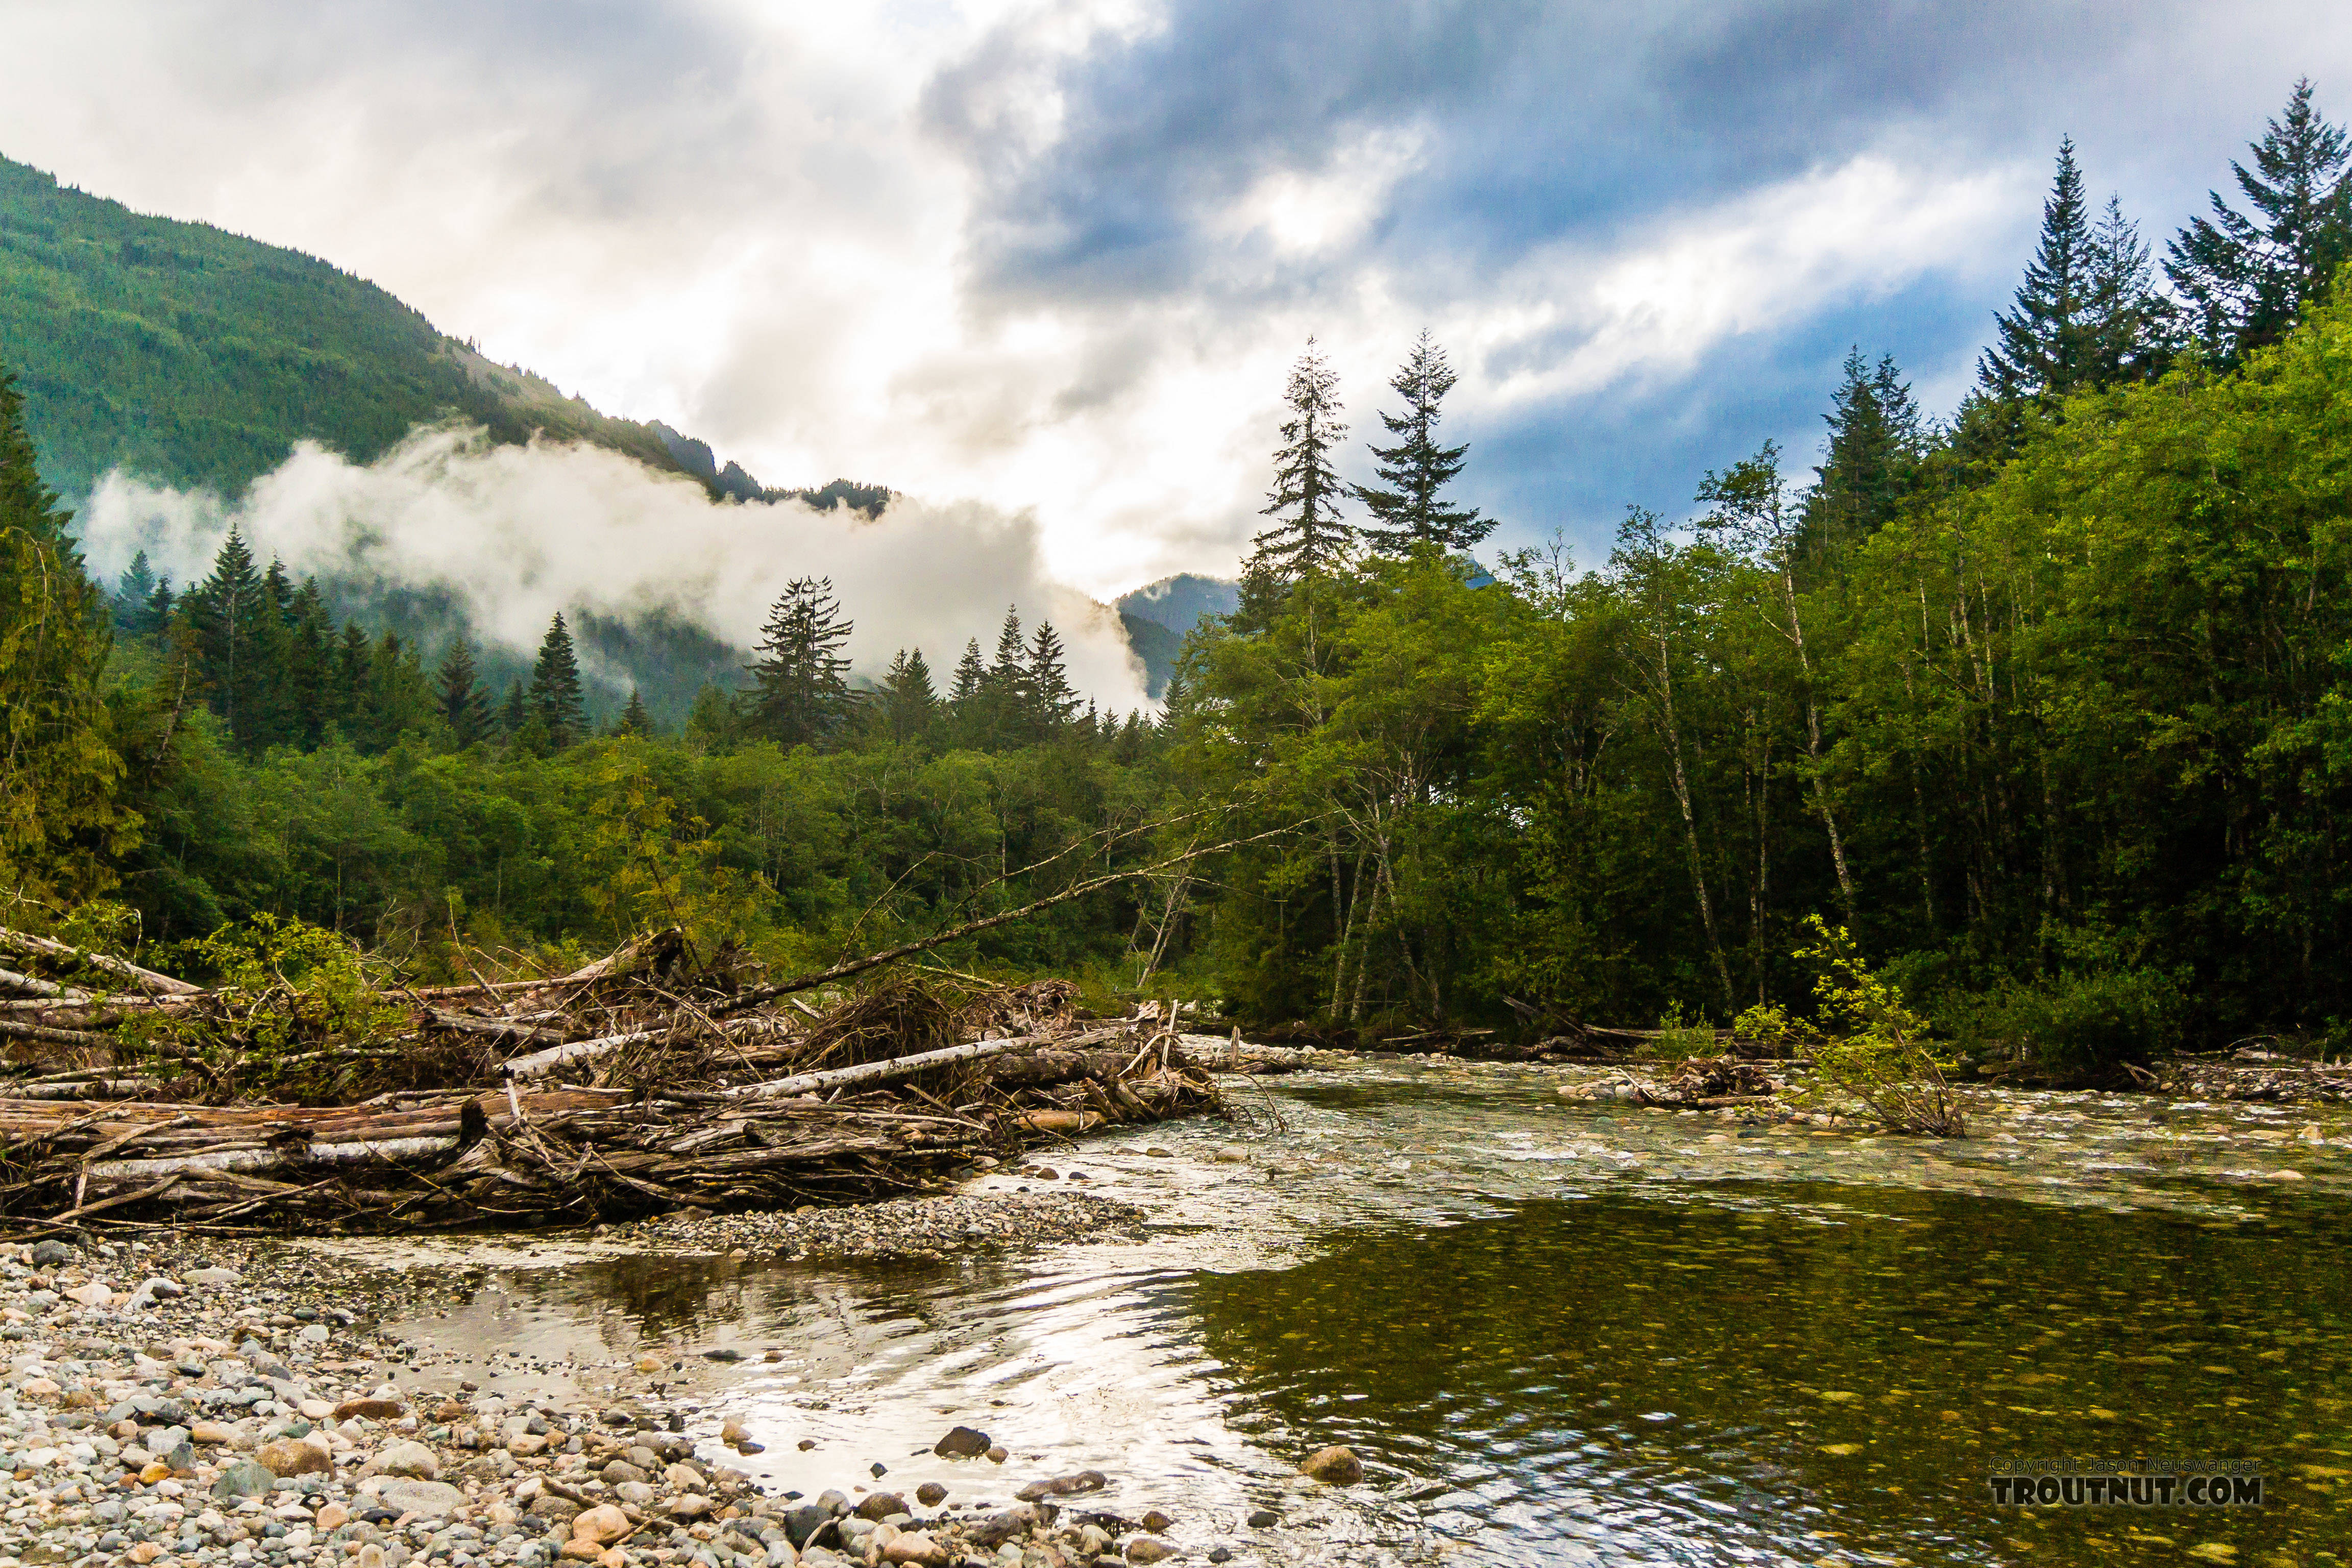  From the South Fork Snoqualmie River in Washington.